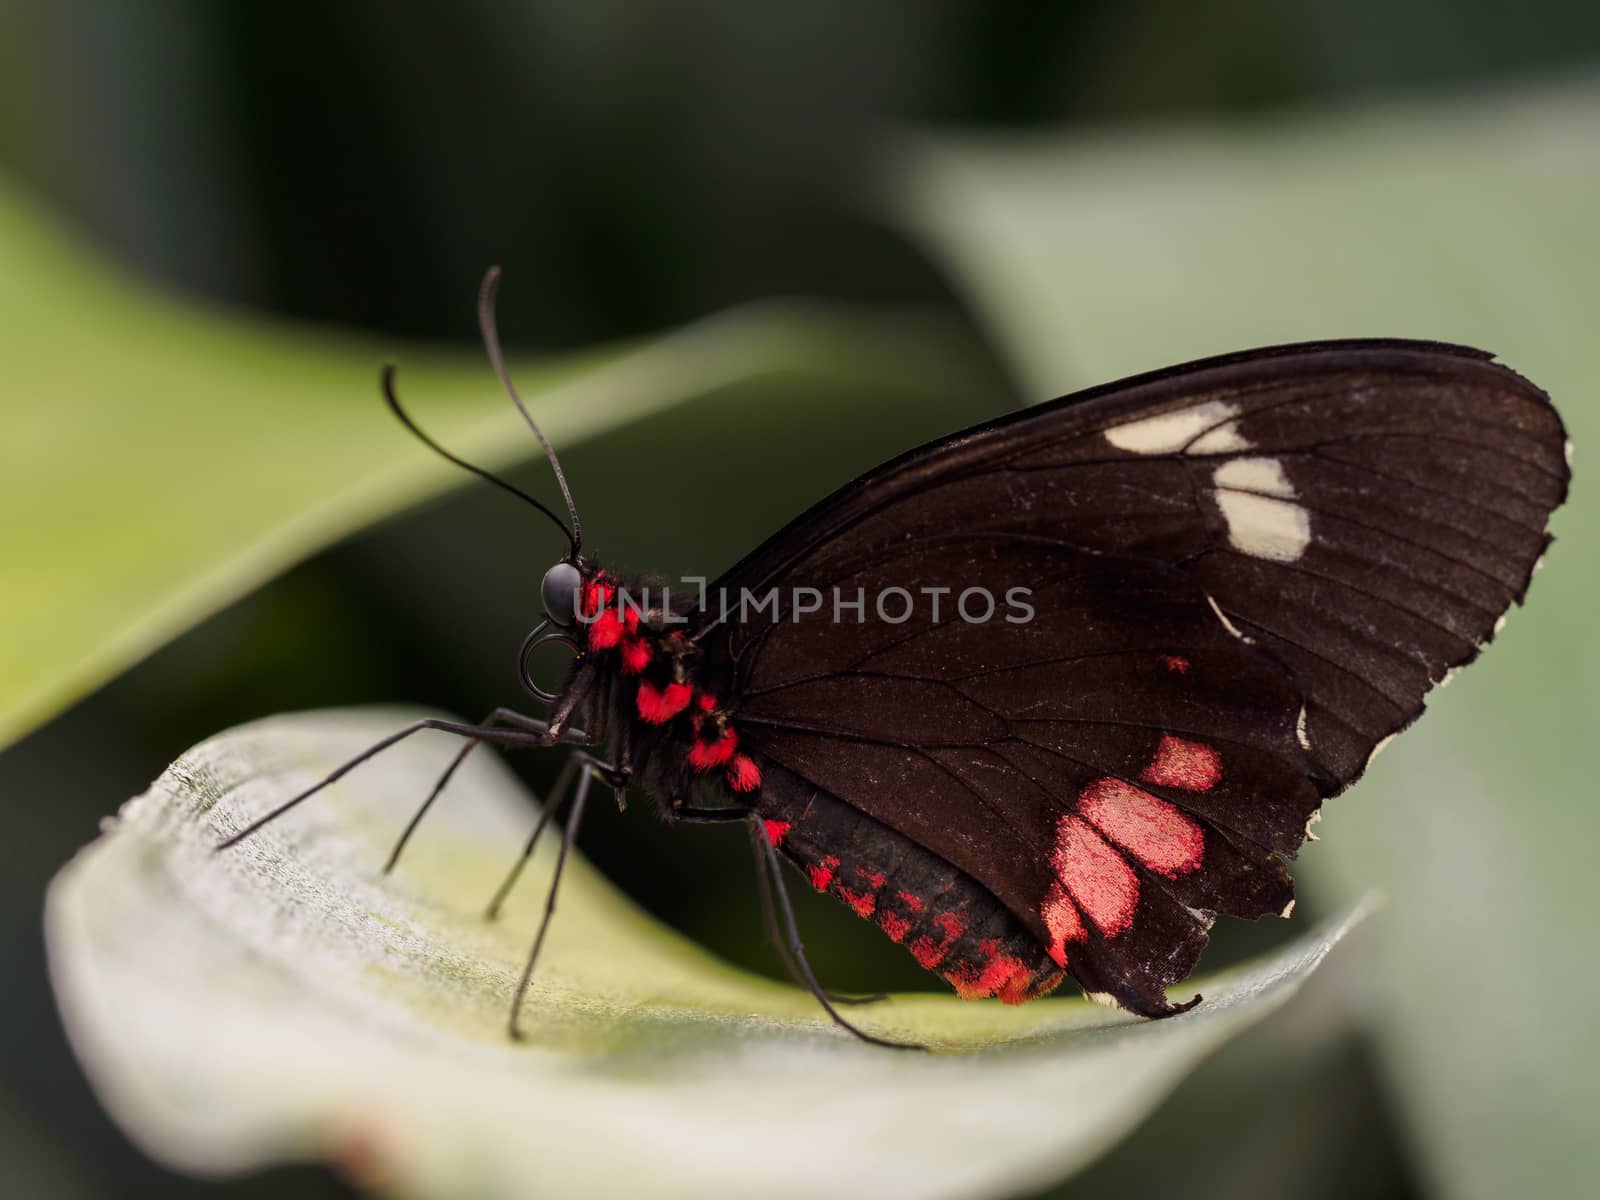 Black and red Doris butterfly on a leaf